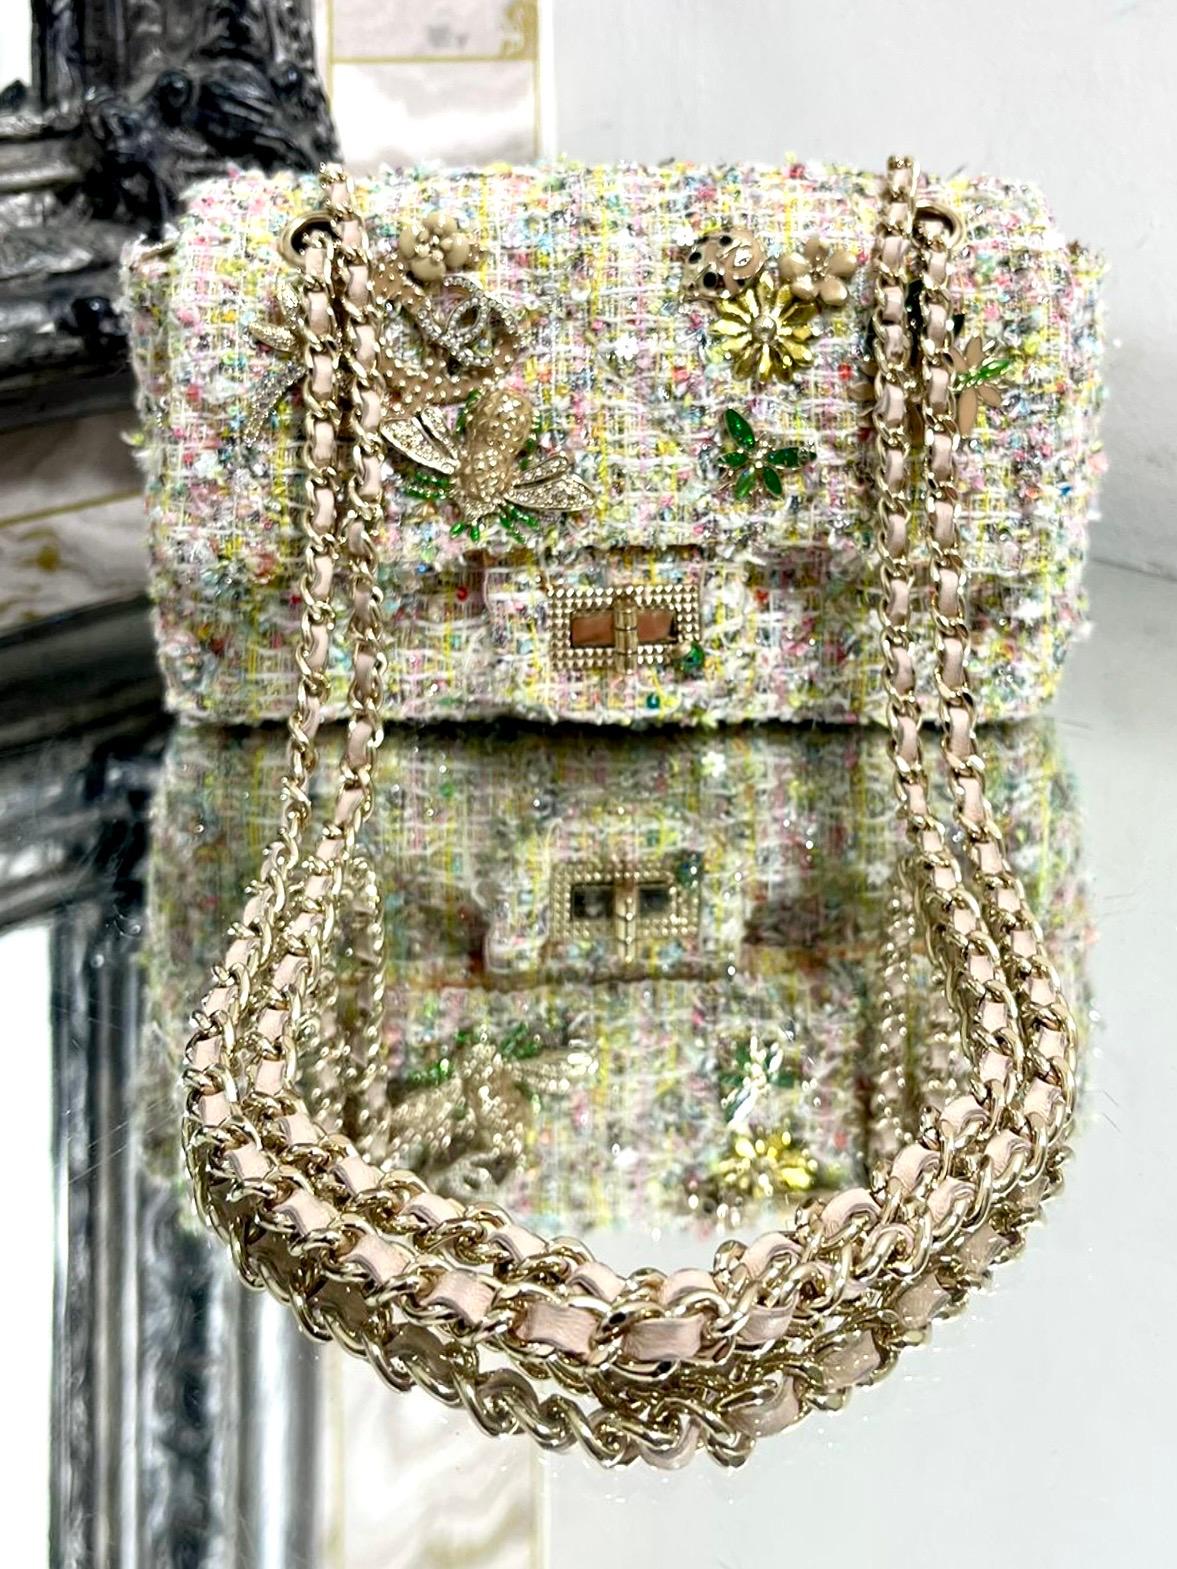 Ltd Edition - Chanel Ltd Edition Tweed Garden Party Charm Bag

From 2011 collection - Fantasy tweed bag in an array of colours.

Crystal and enamel charms adorned the front flap closure with 'CC'

logos, dragonflies and flowers. Signature re-issue